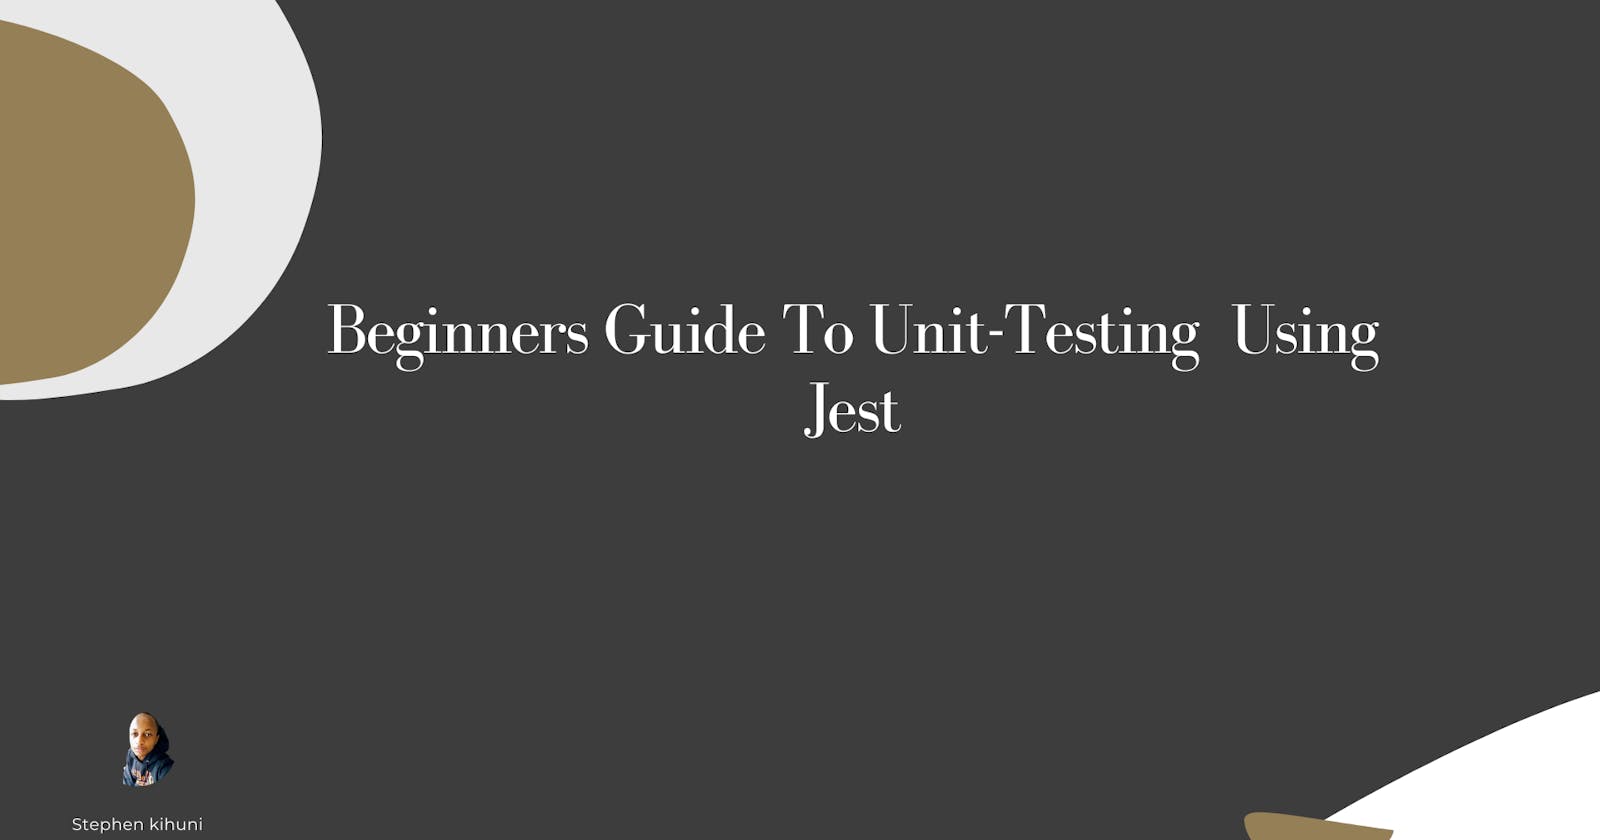 Beginners Guide to Unit-Testing using Jest